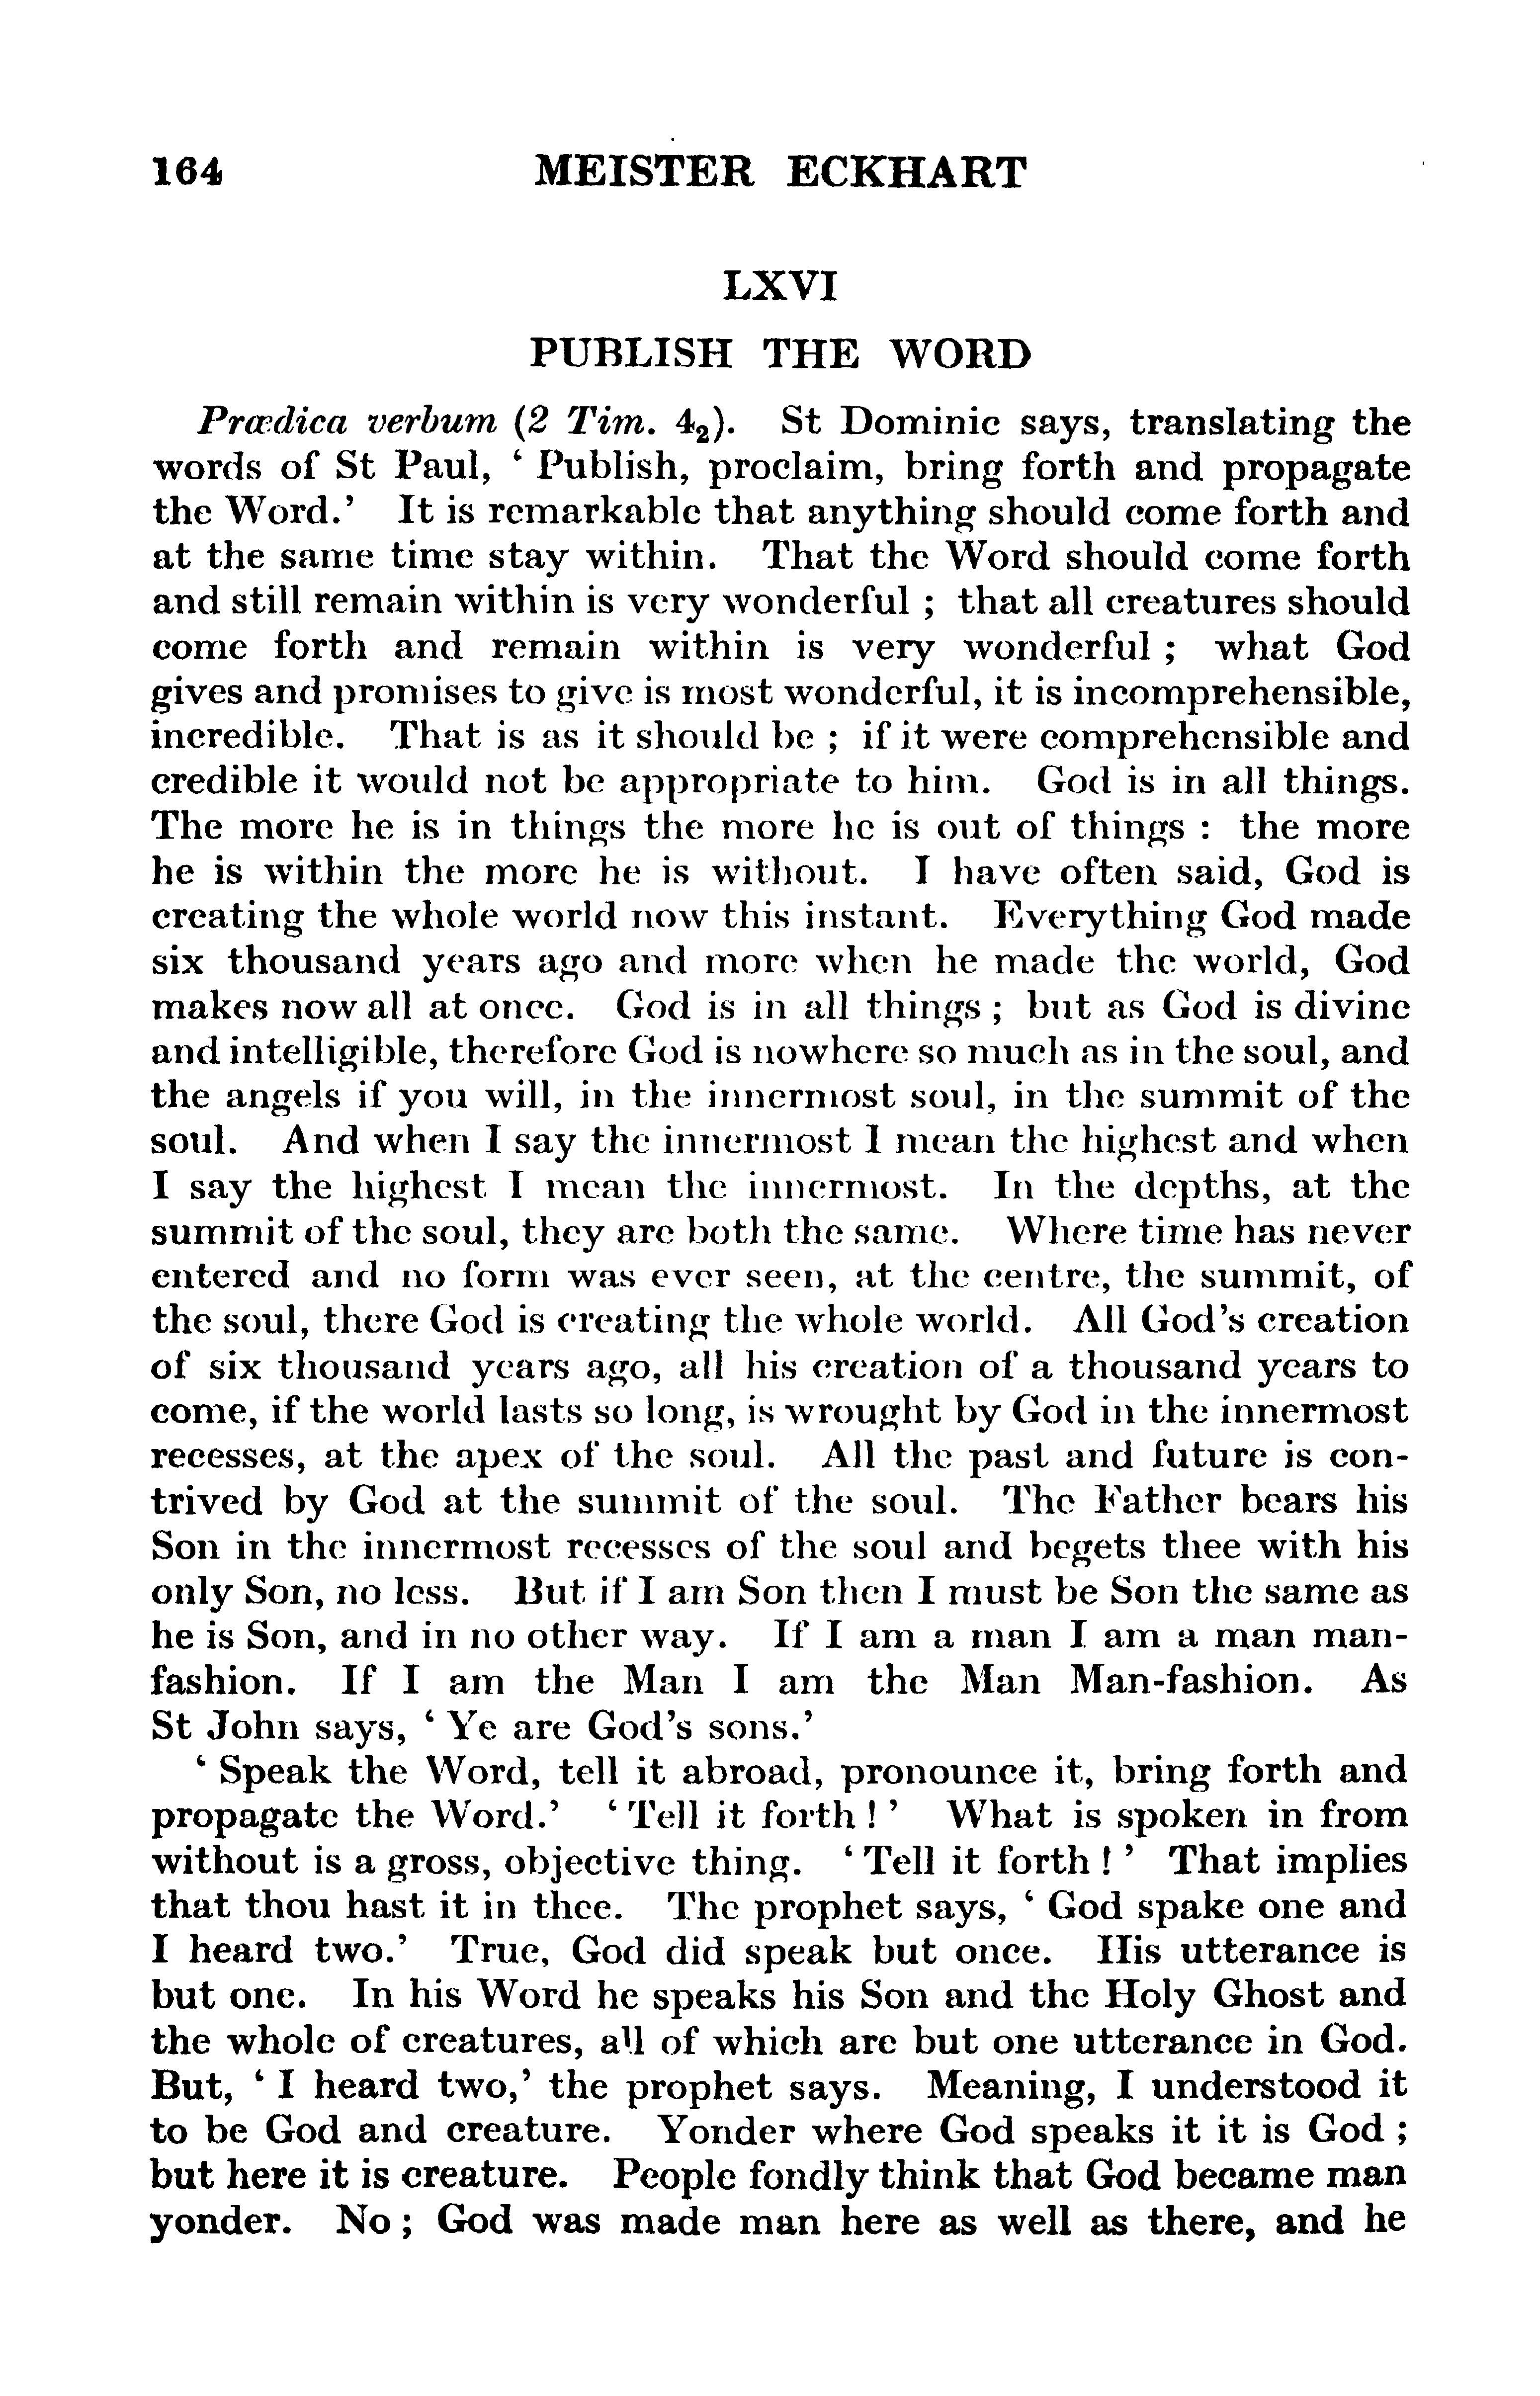 Image of page 0188